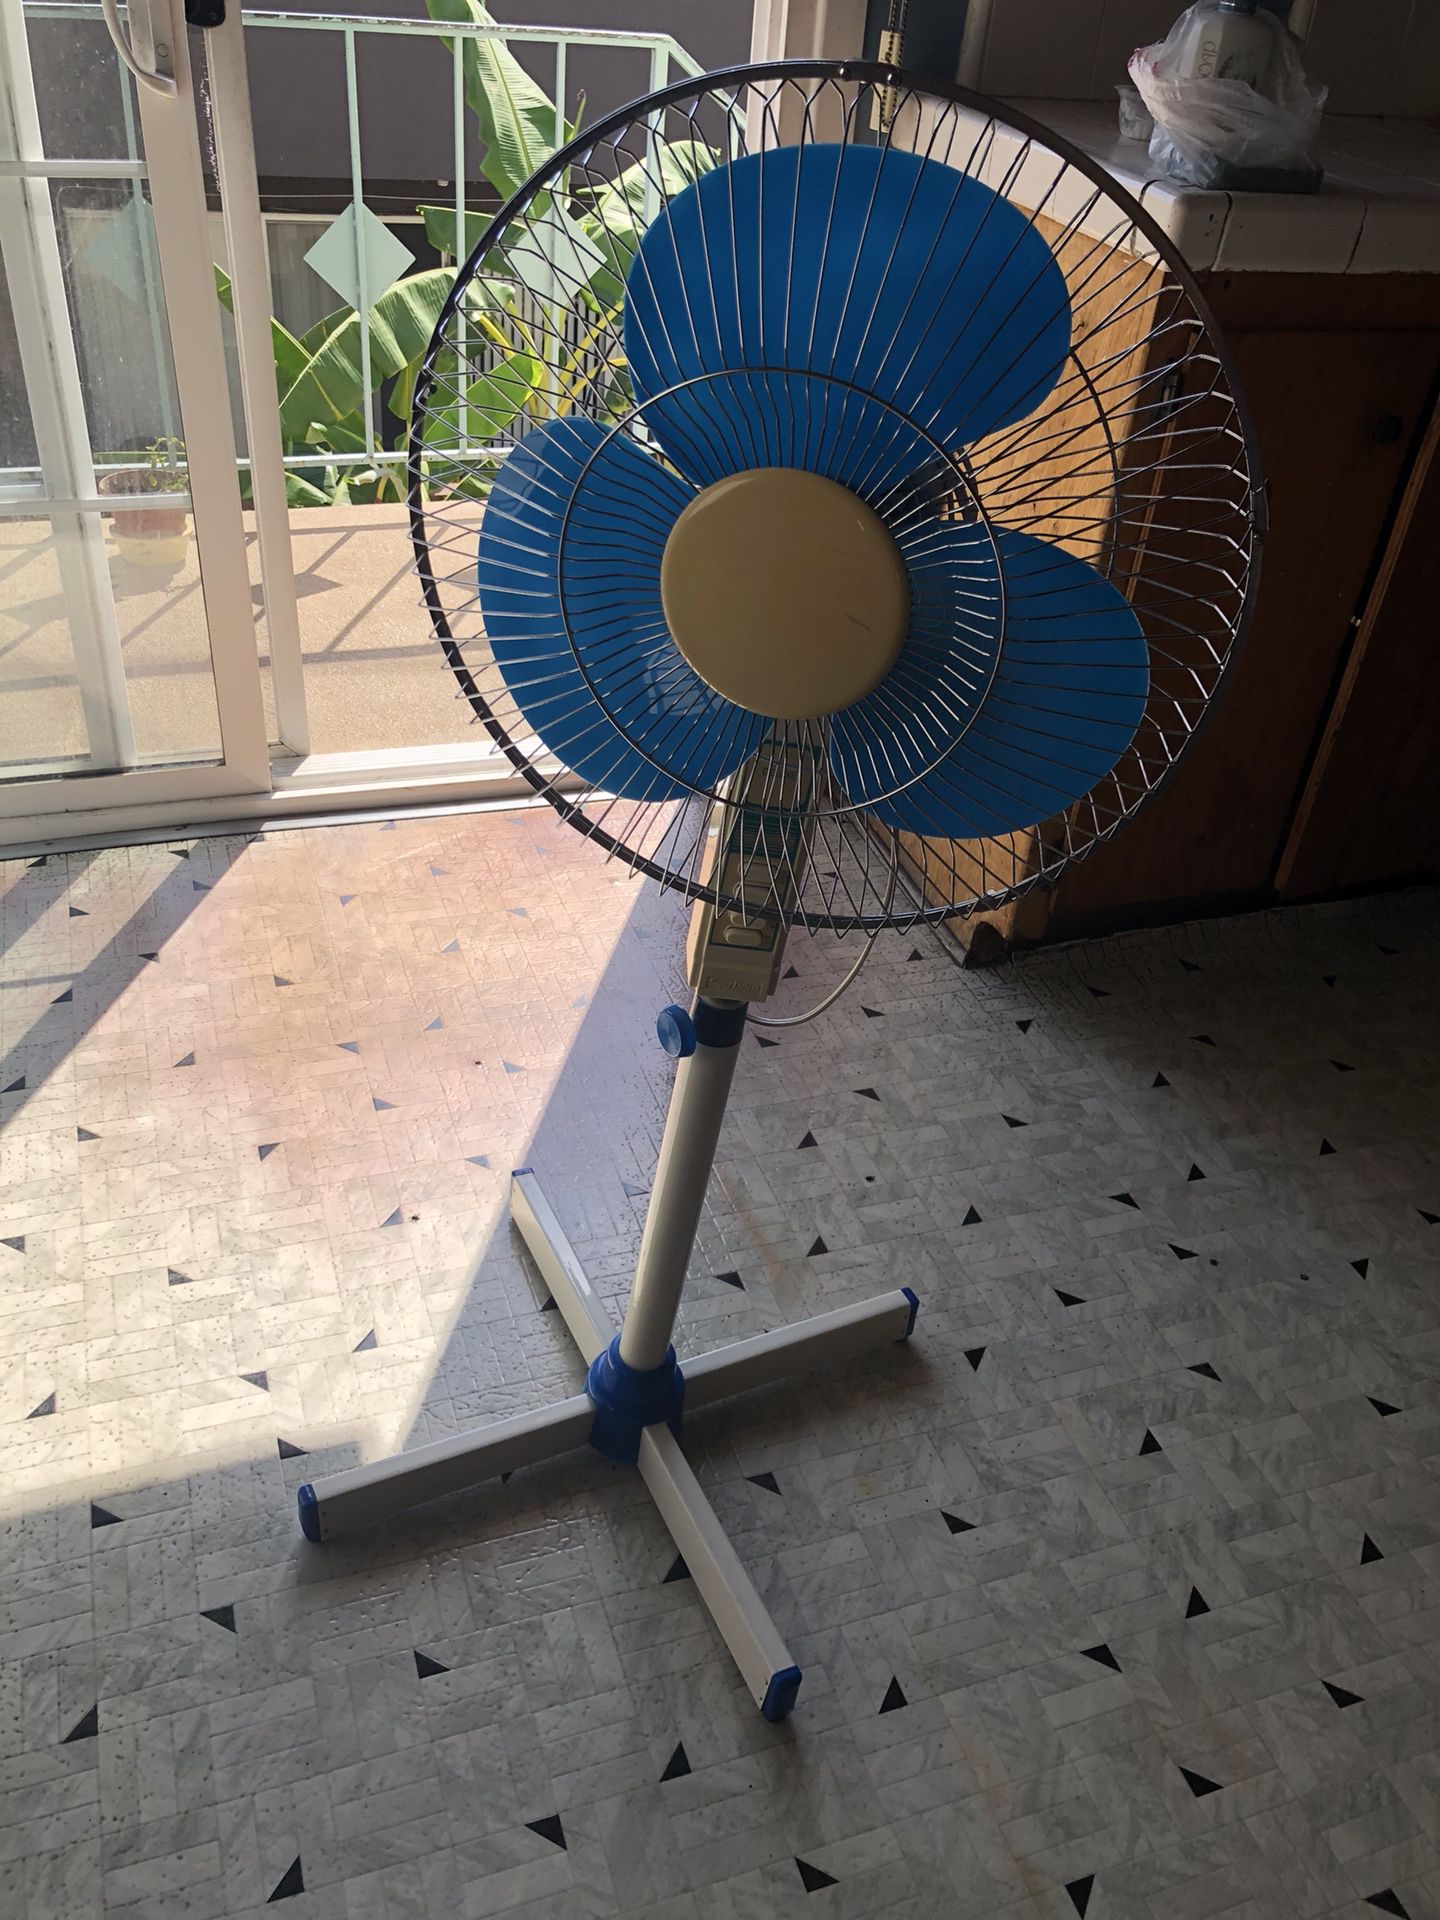 Retro Vintage Super Deluxe Electric Fan Blue for Sale in Culver City, CA OfferUp